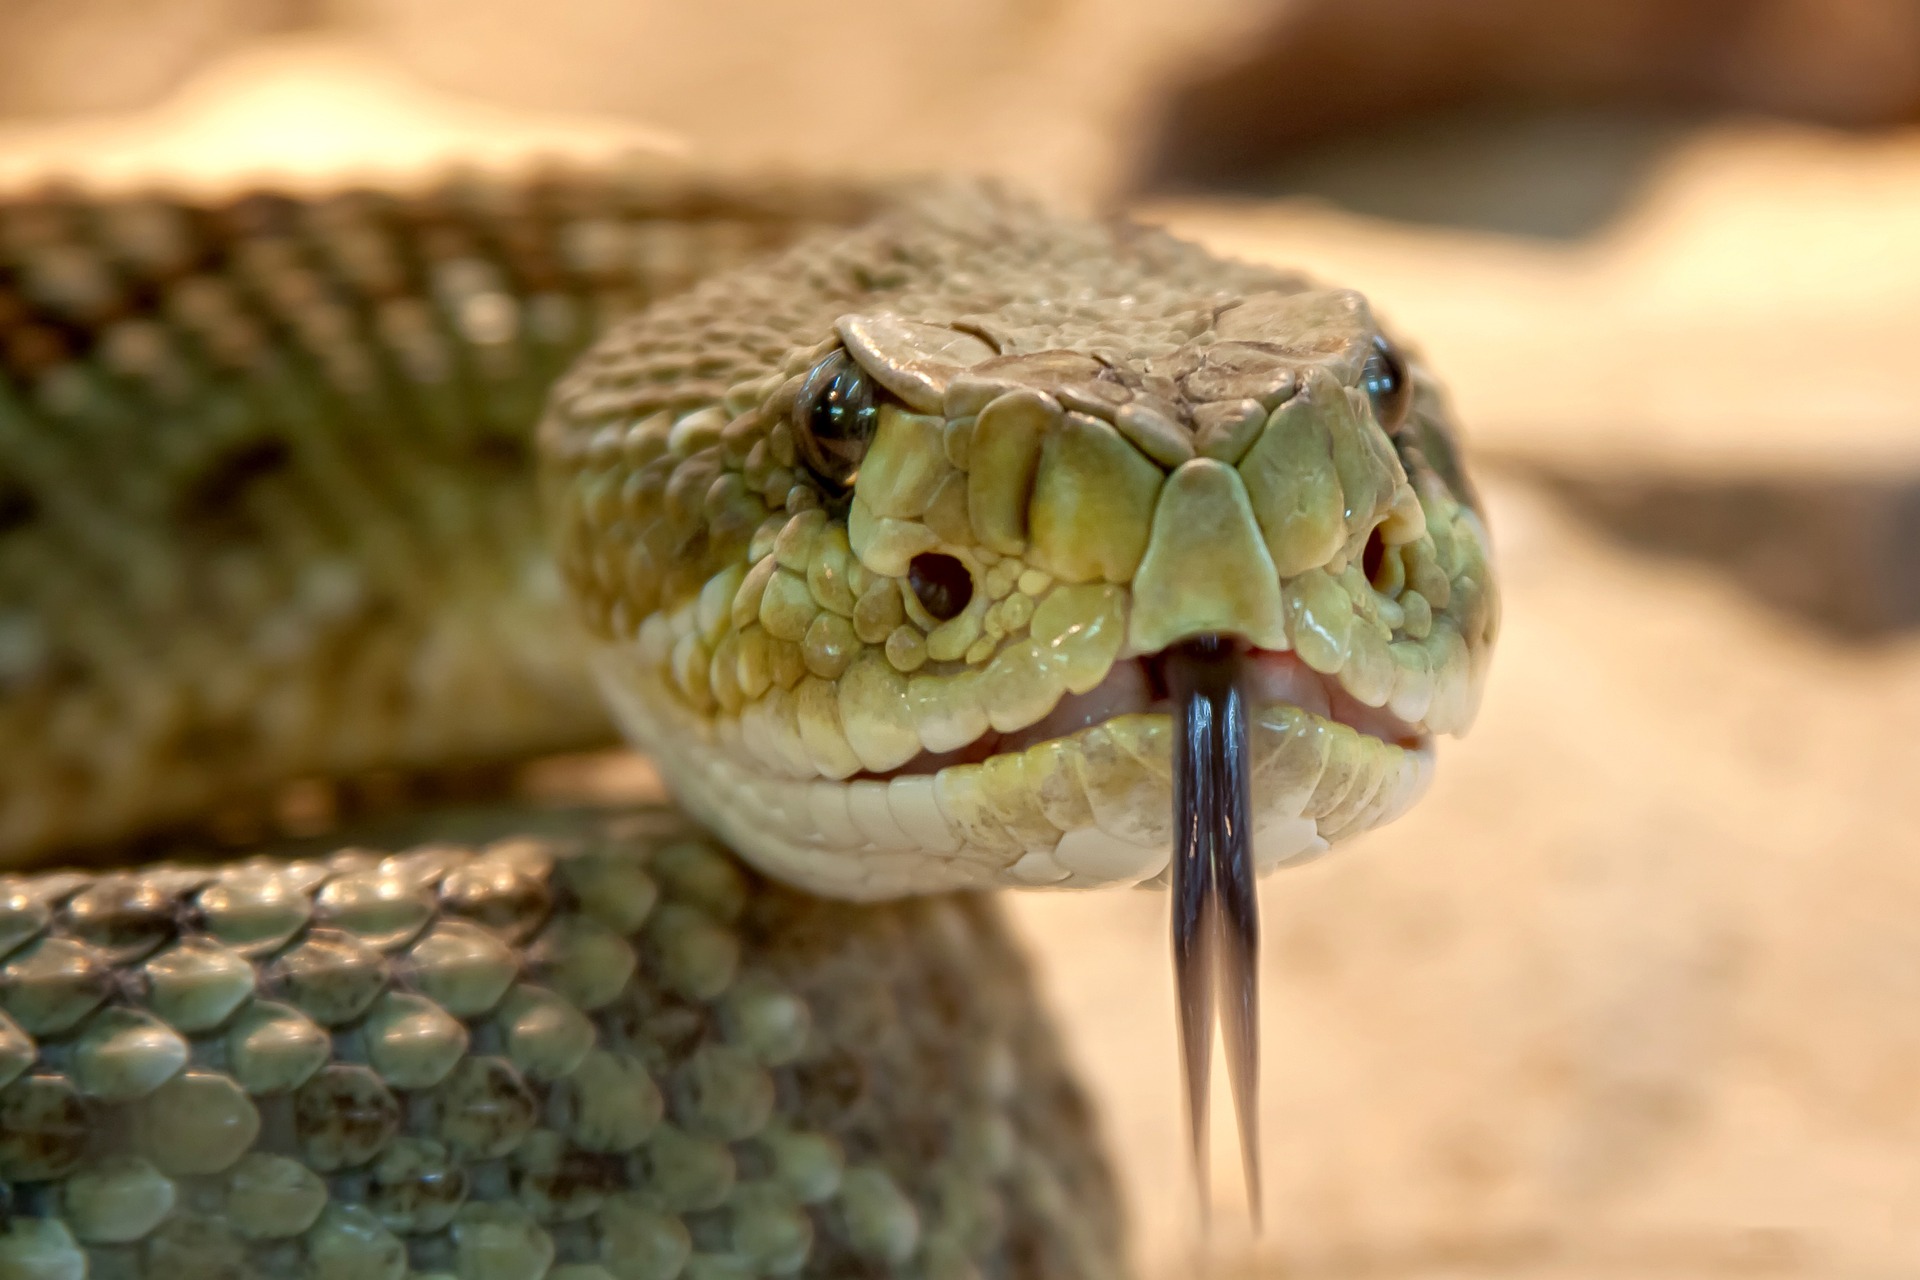 There are various dangerous snakes in Texas that you should watch out for.